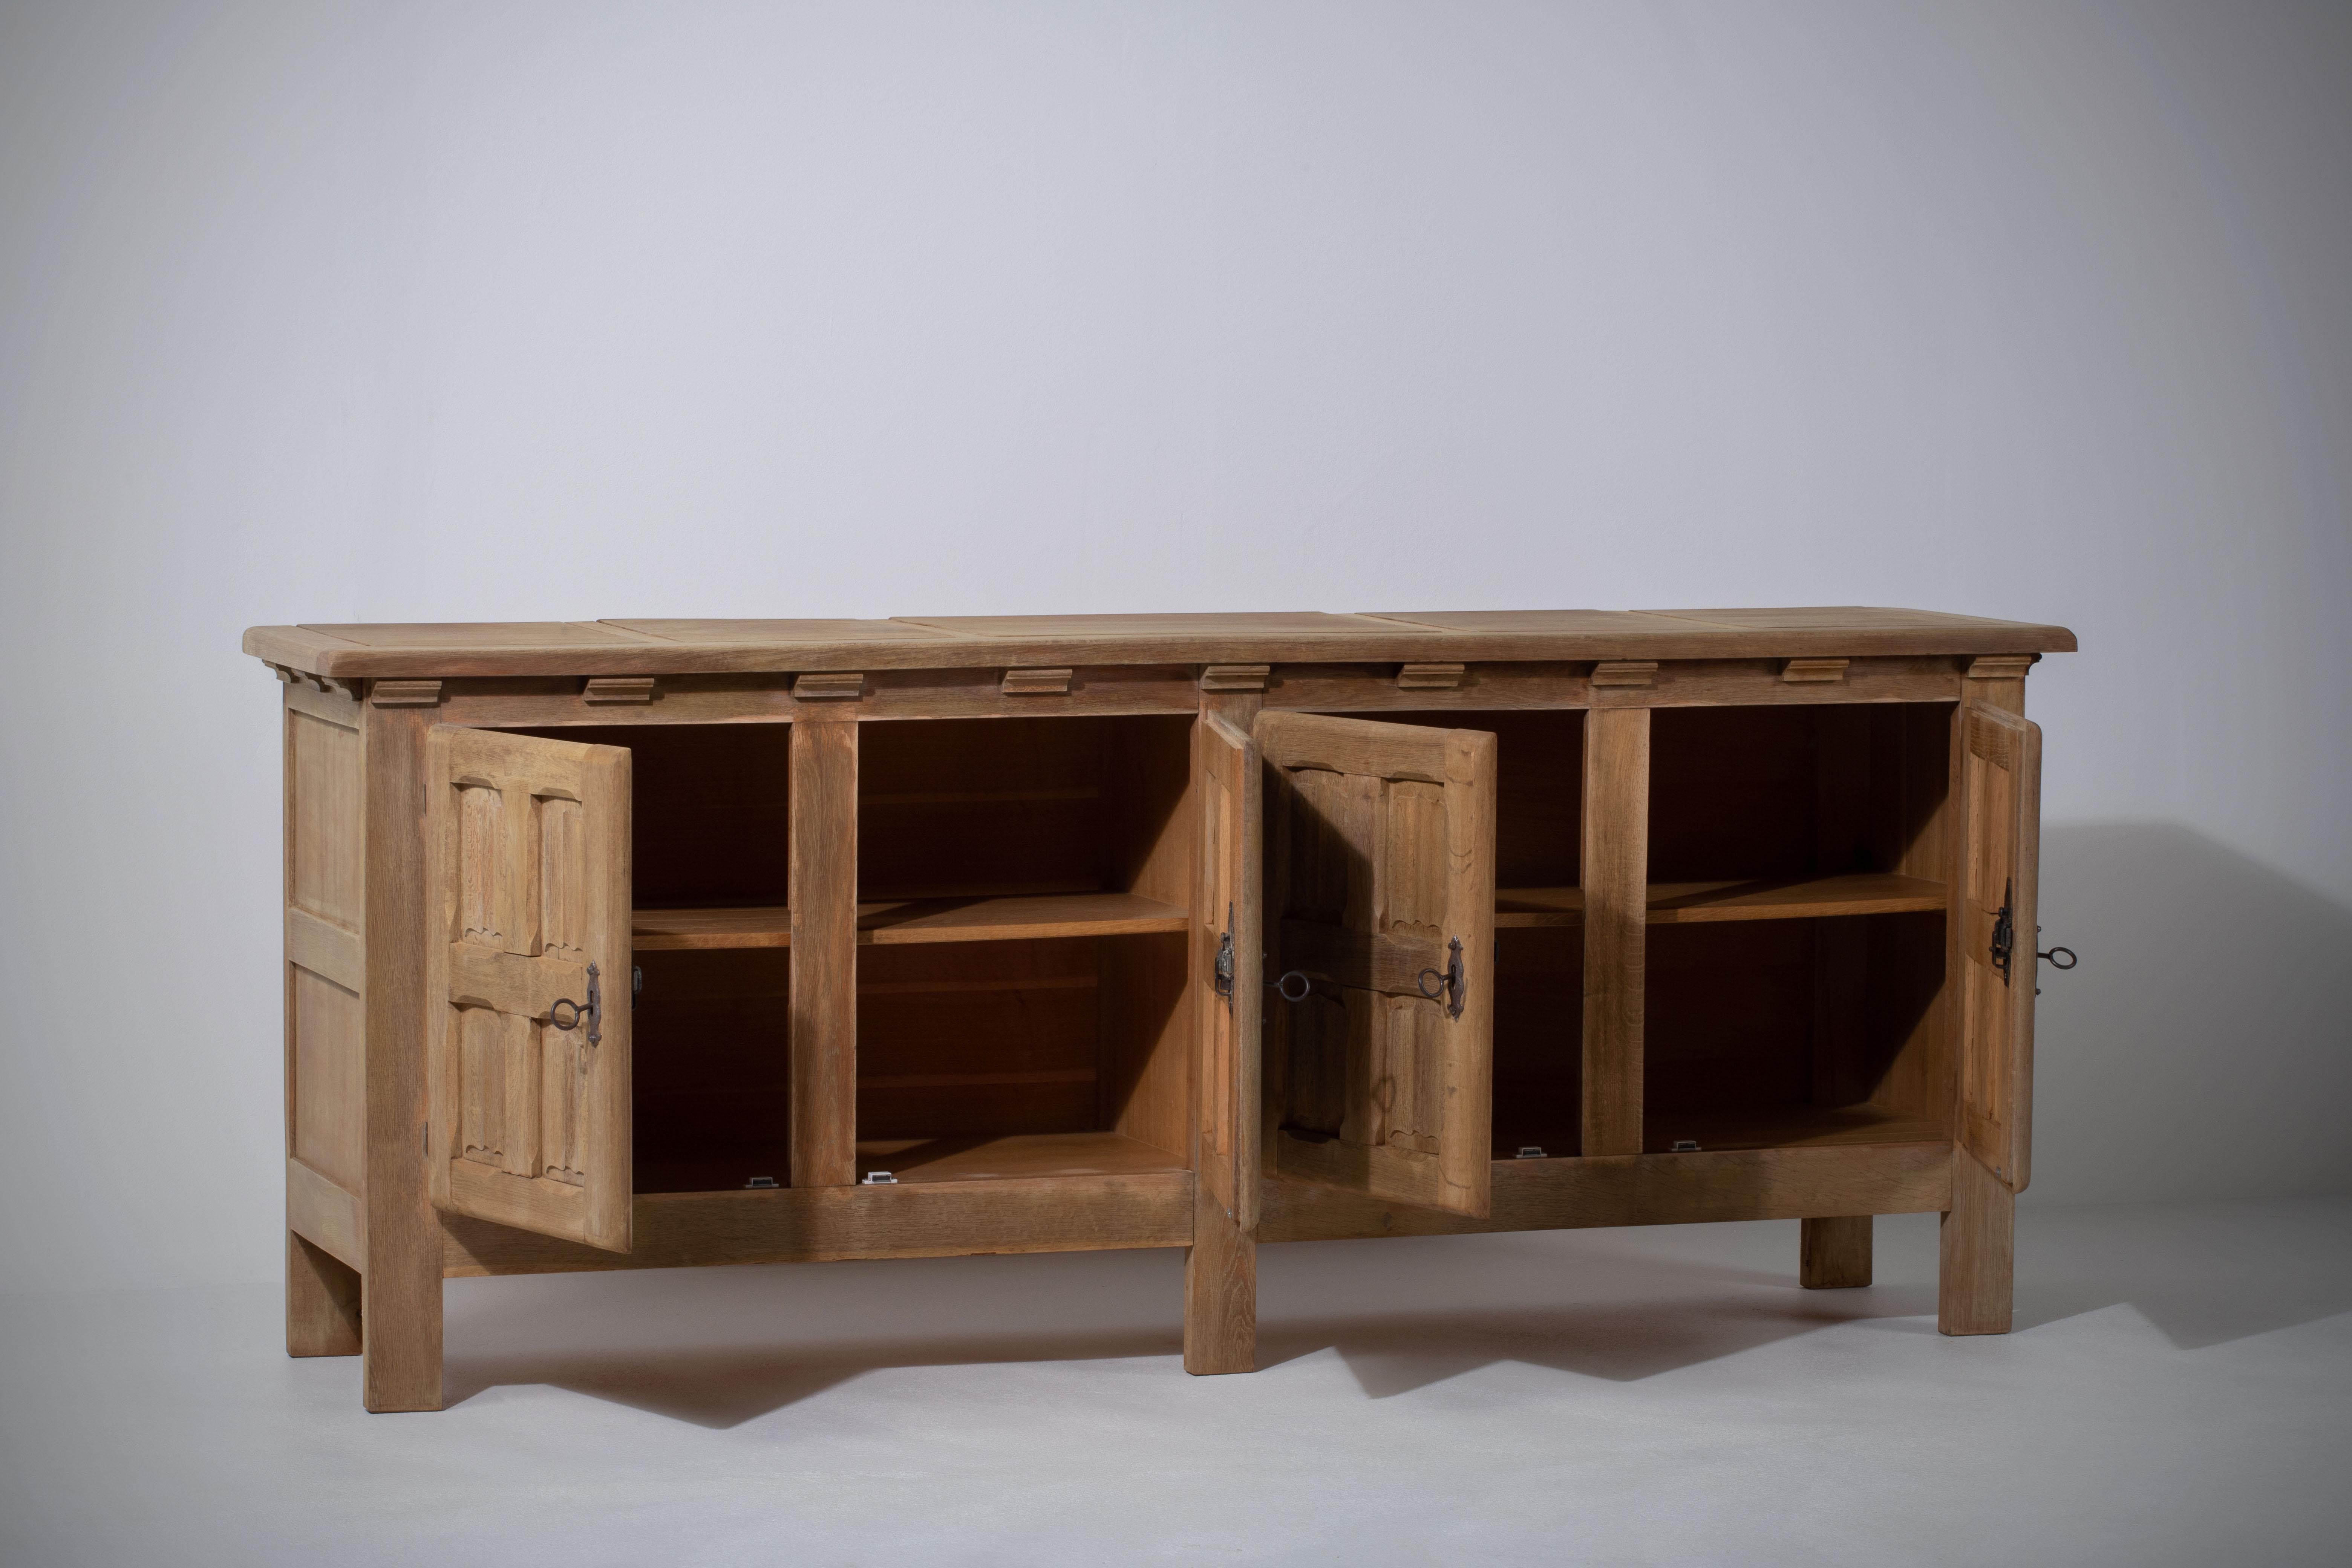 This characteristic cabinet, buffet in solid oak was inspired by the work of French designer duo Guillerme et Chambron or Charlotte Perriand.

Unearthed in a chic chalet near Chamonix, this sideboard from the 60s offers an authentic and warm